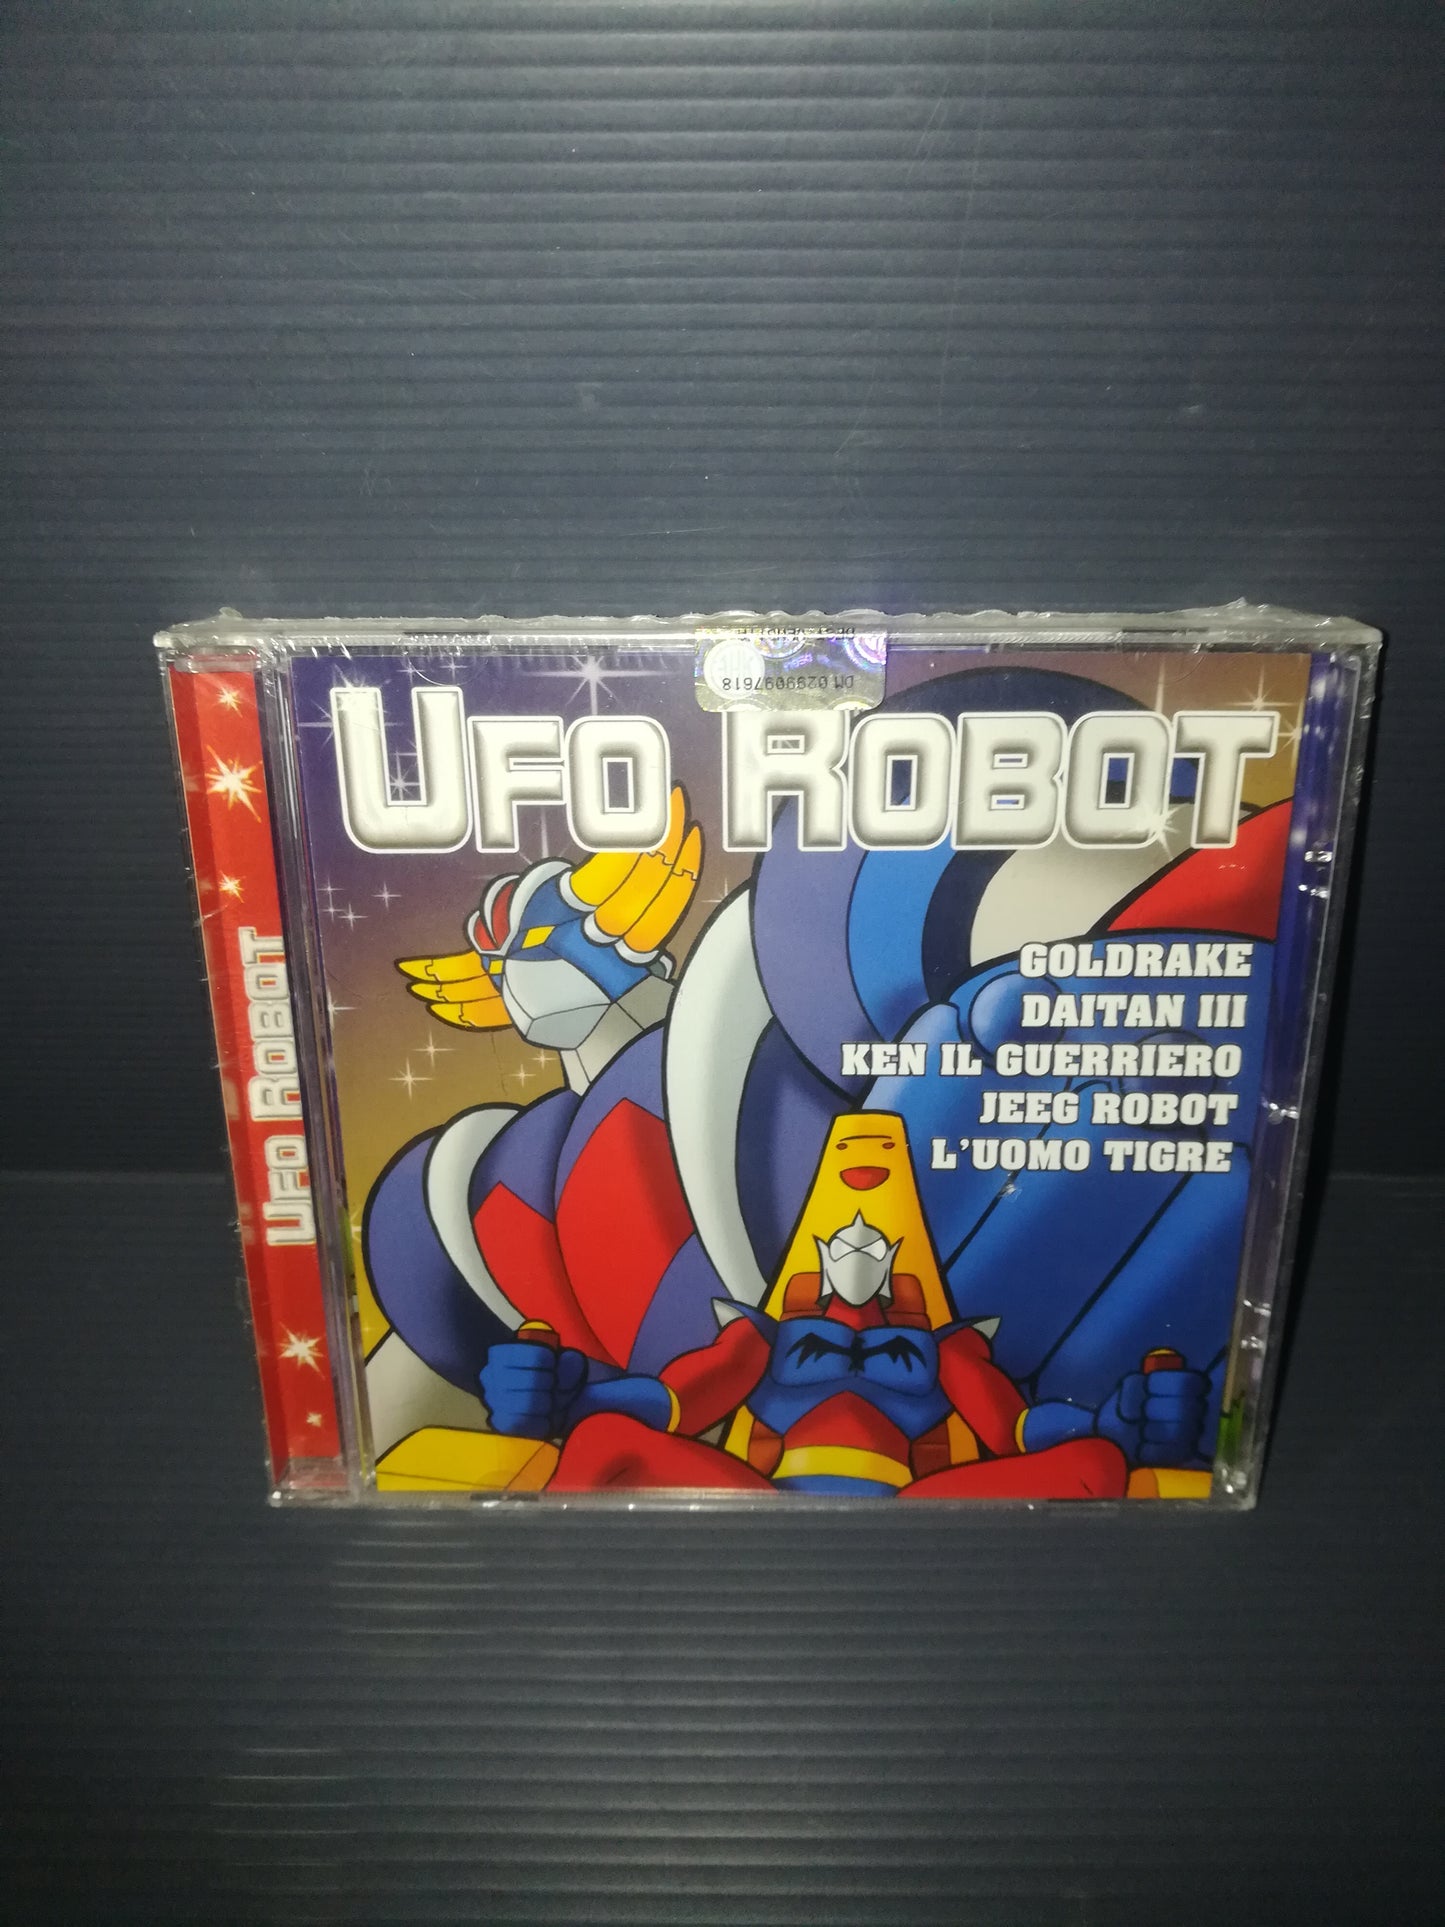 Ufo Robot" CD

 Published in 2008 by Music Guardian Plus